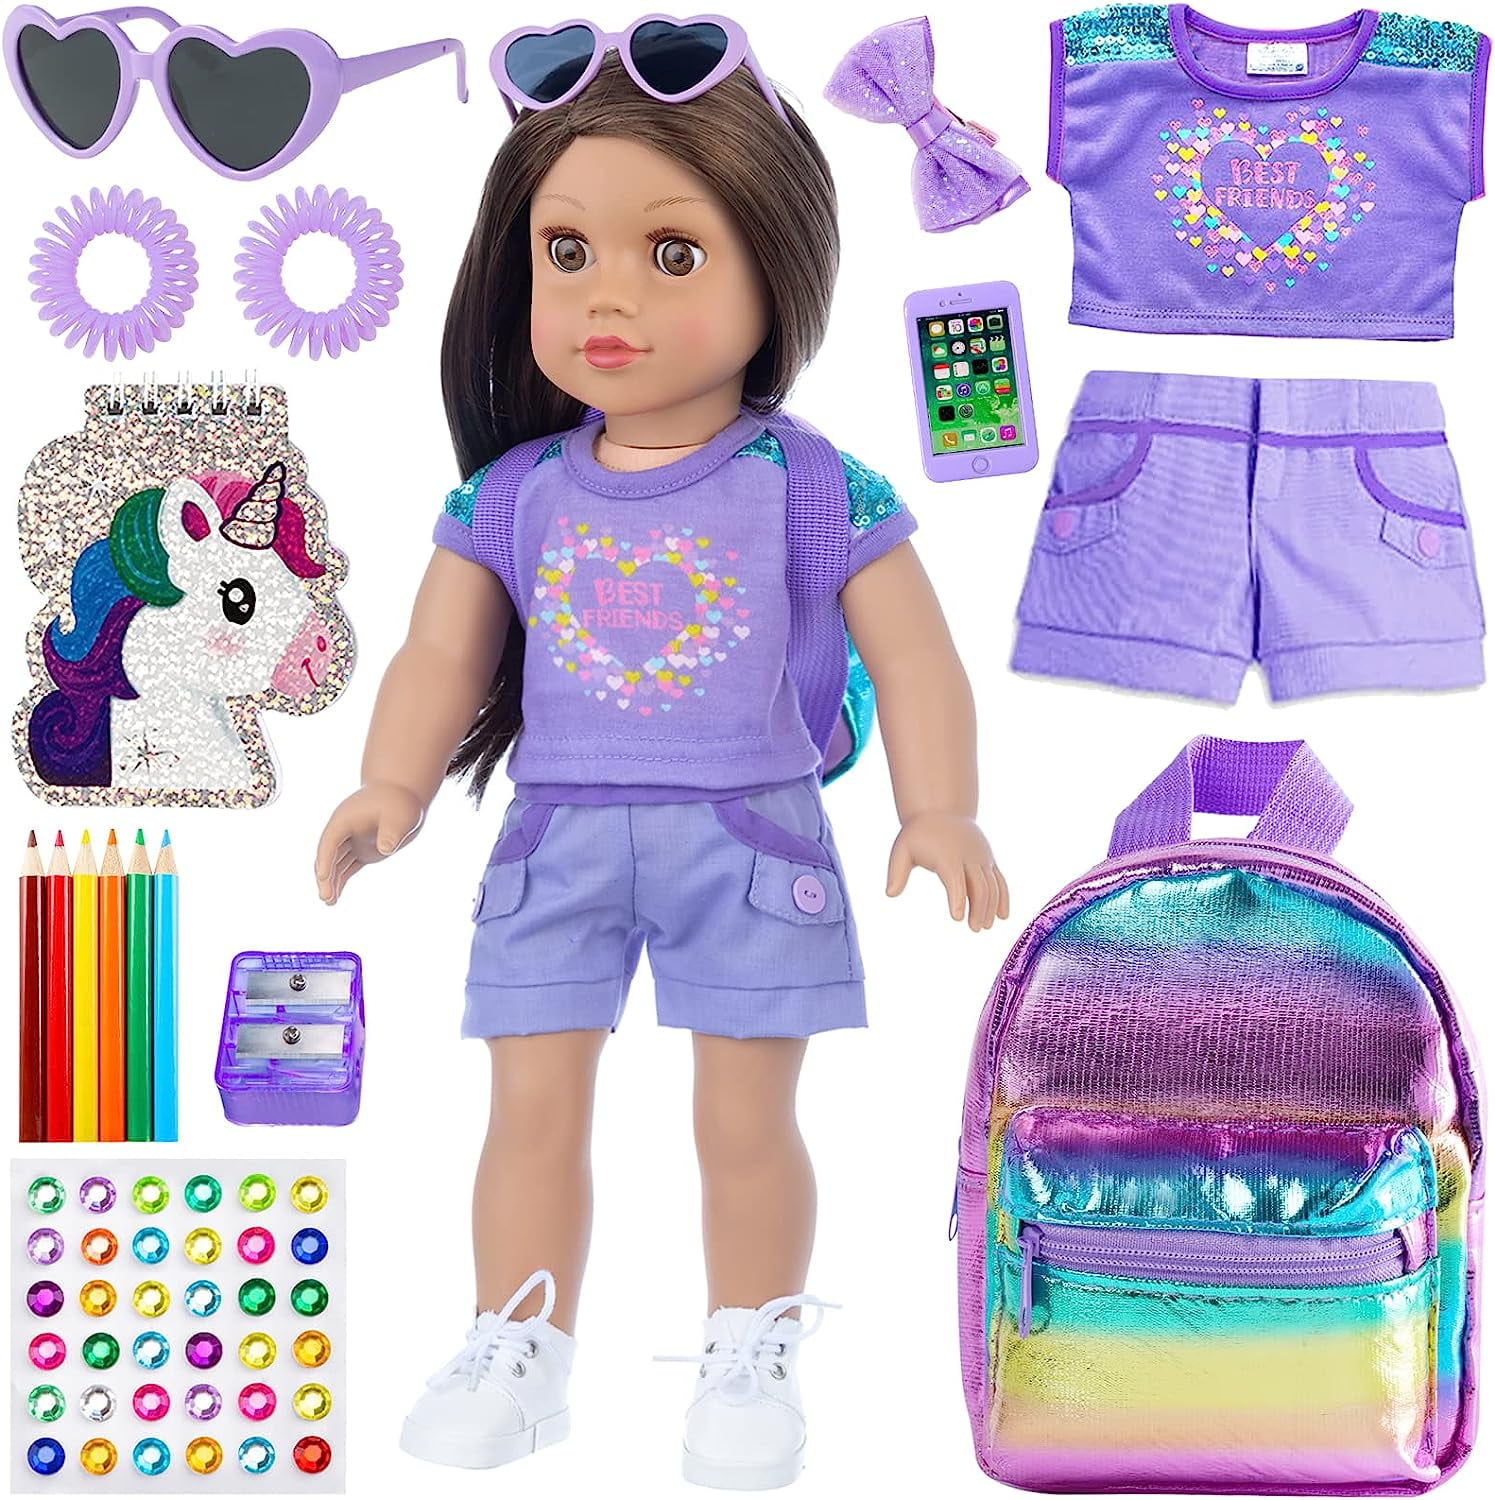 Bendon Inc. Lisa Frank Toys Activity Set - Ultimate Lisa Frank Party Pack with Lisa Frank Dolls, Games, Puzzles, Coloring Activities for Kids Adults